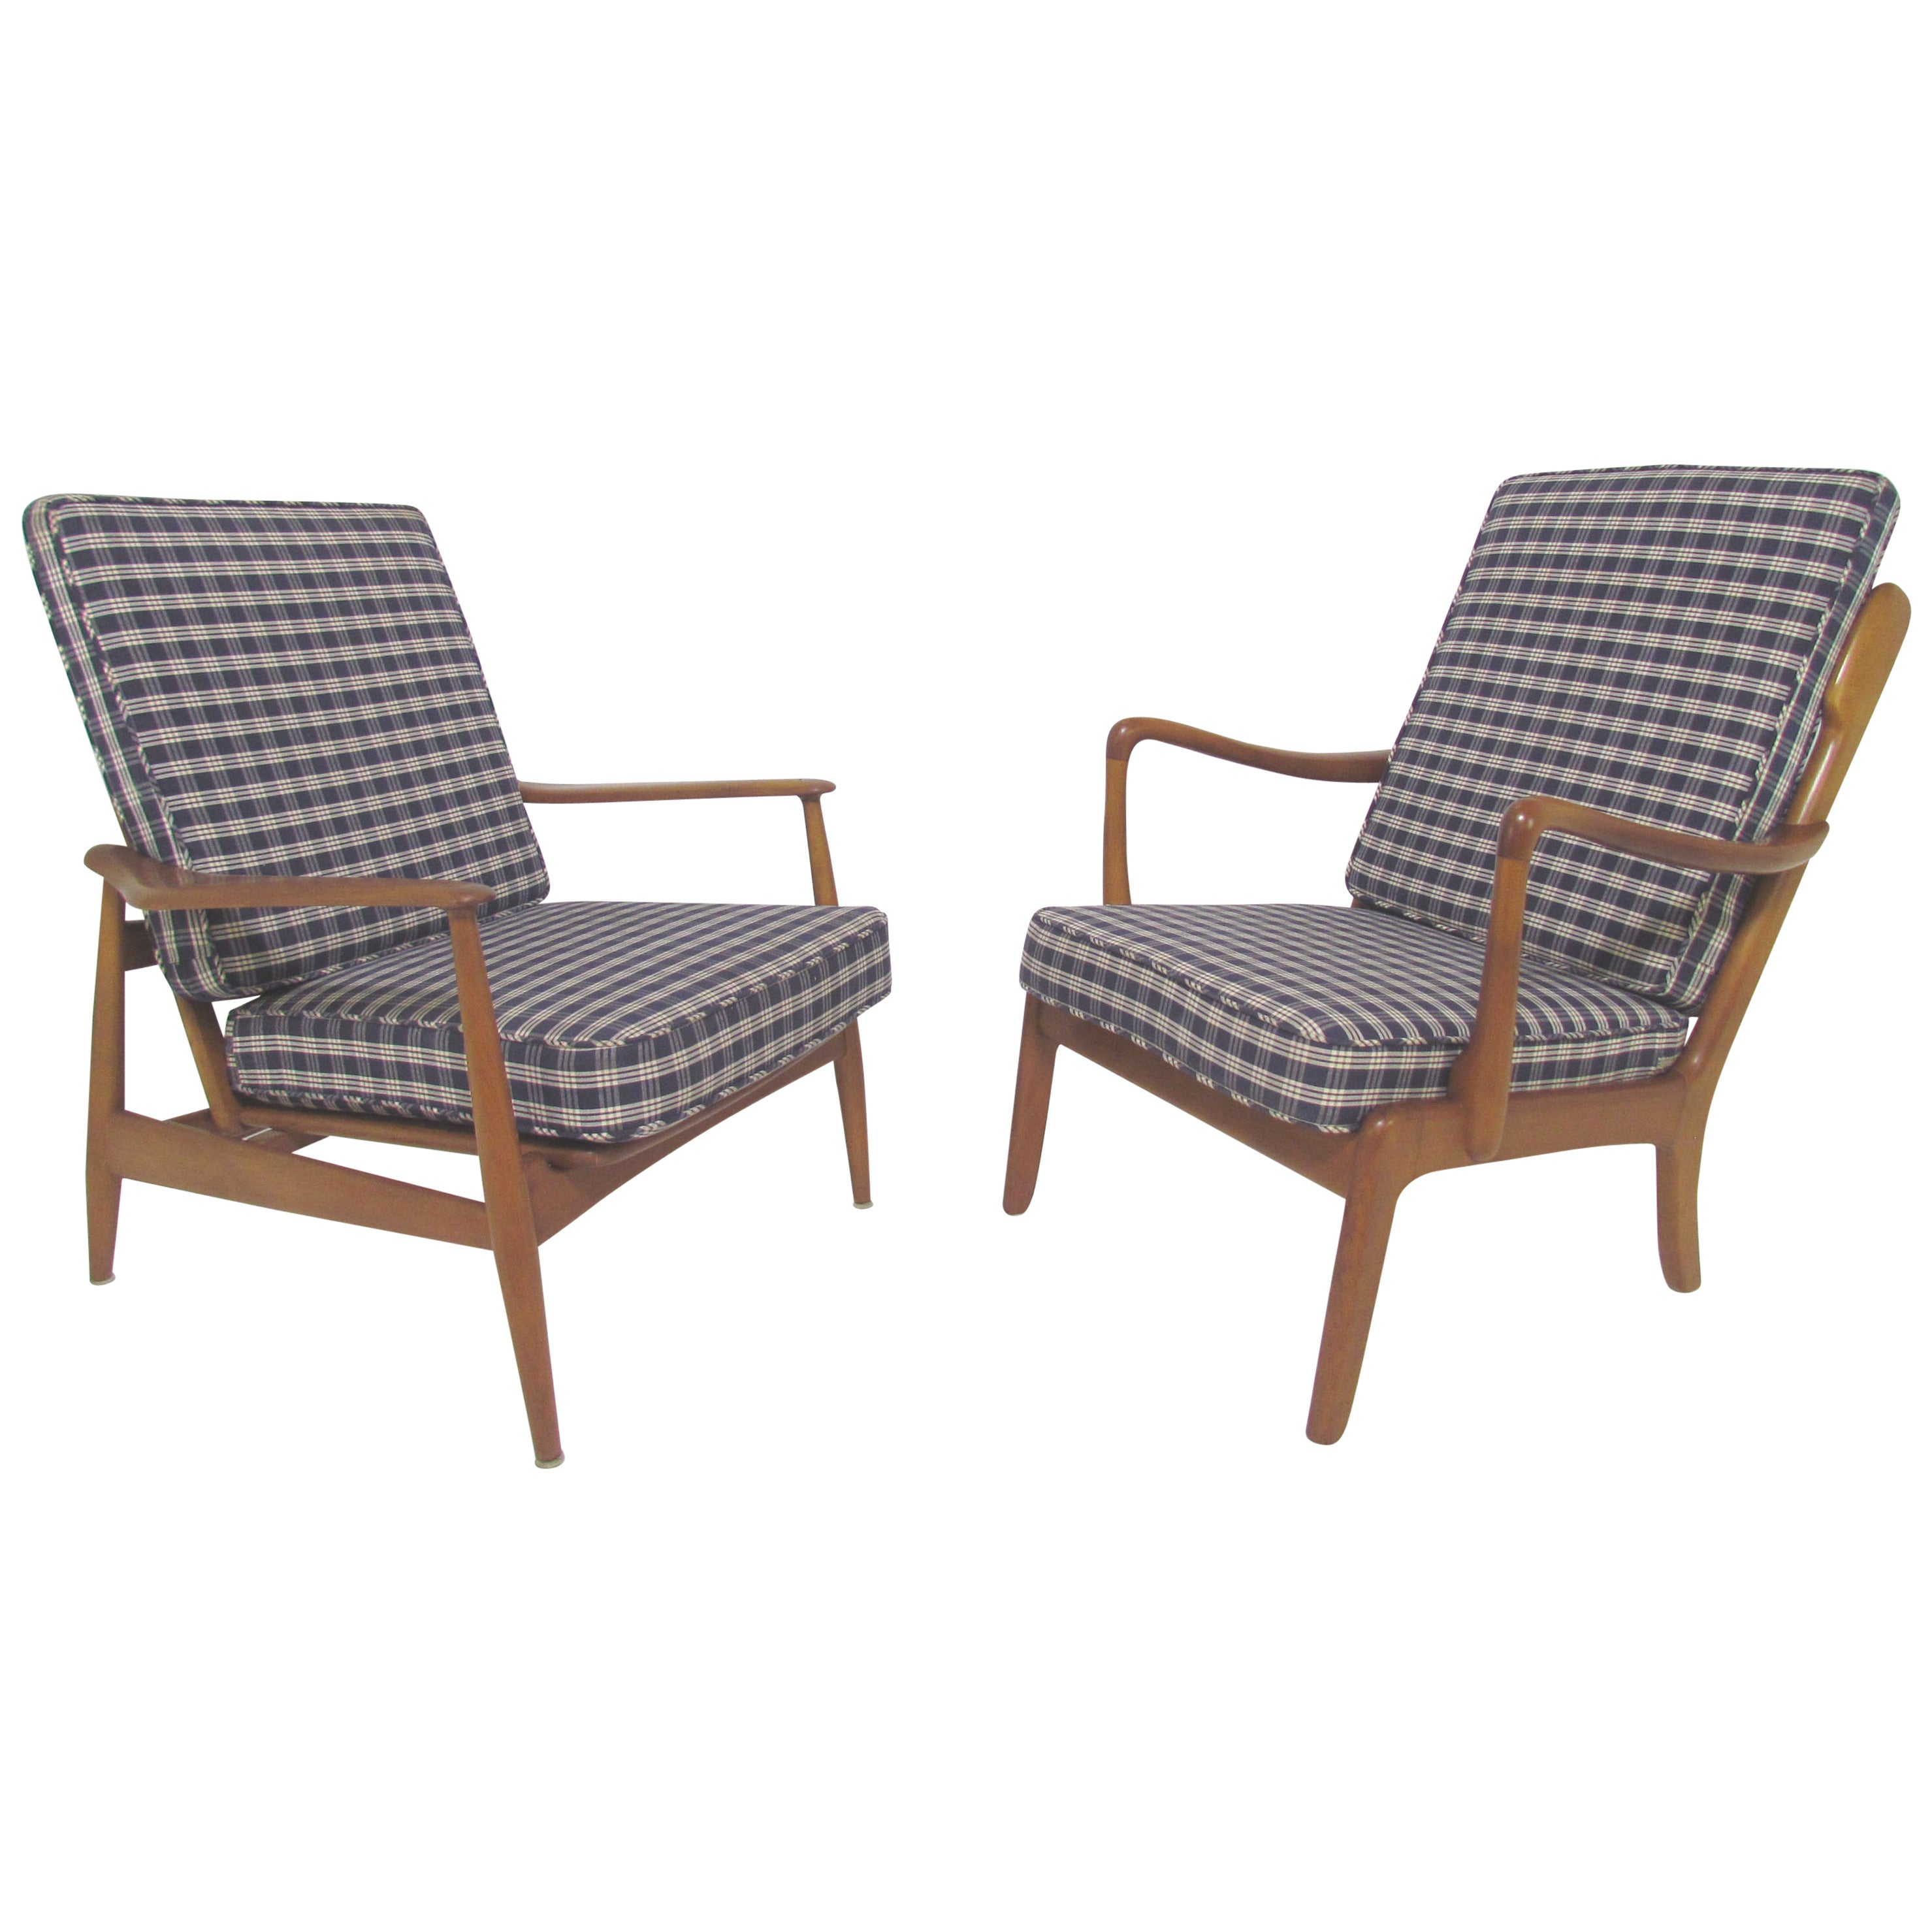 Two Early Danish Lounge Chairs by Vodder and Wanscher for France & Daverkosen